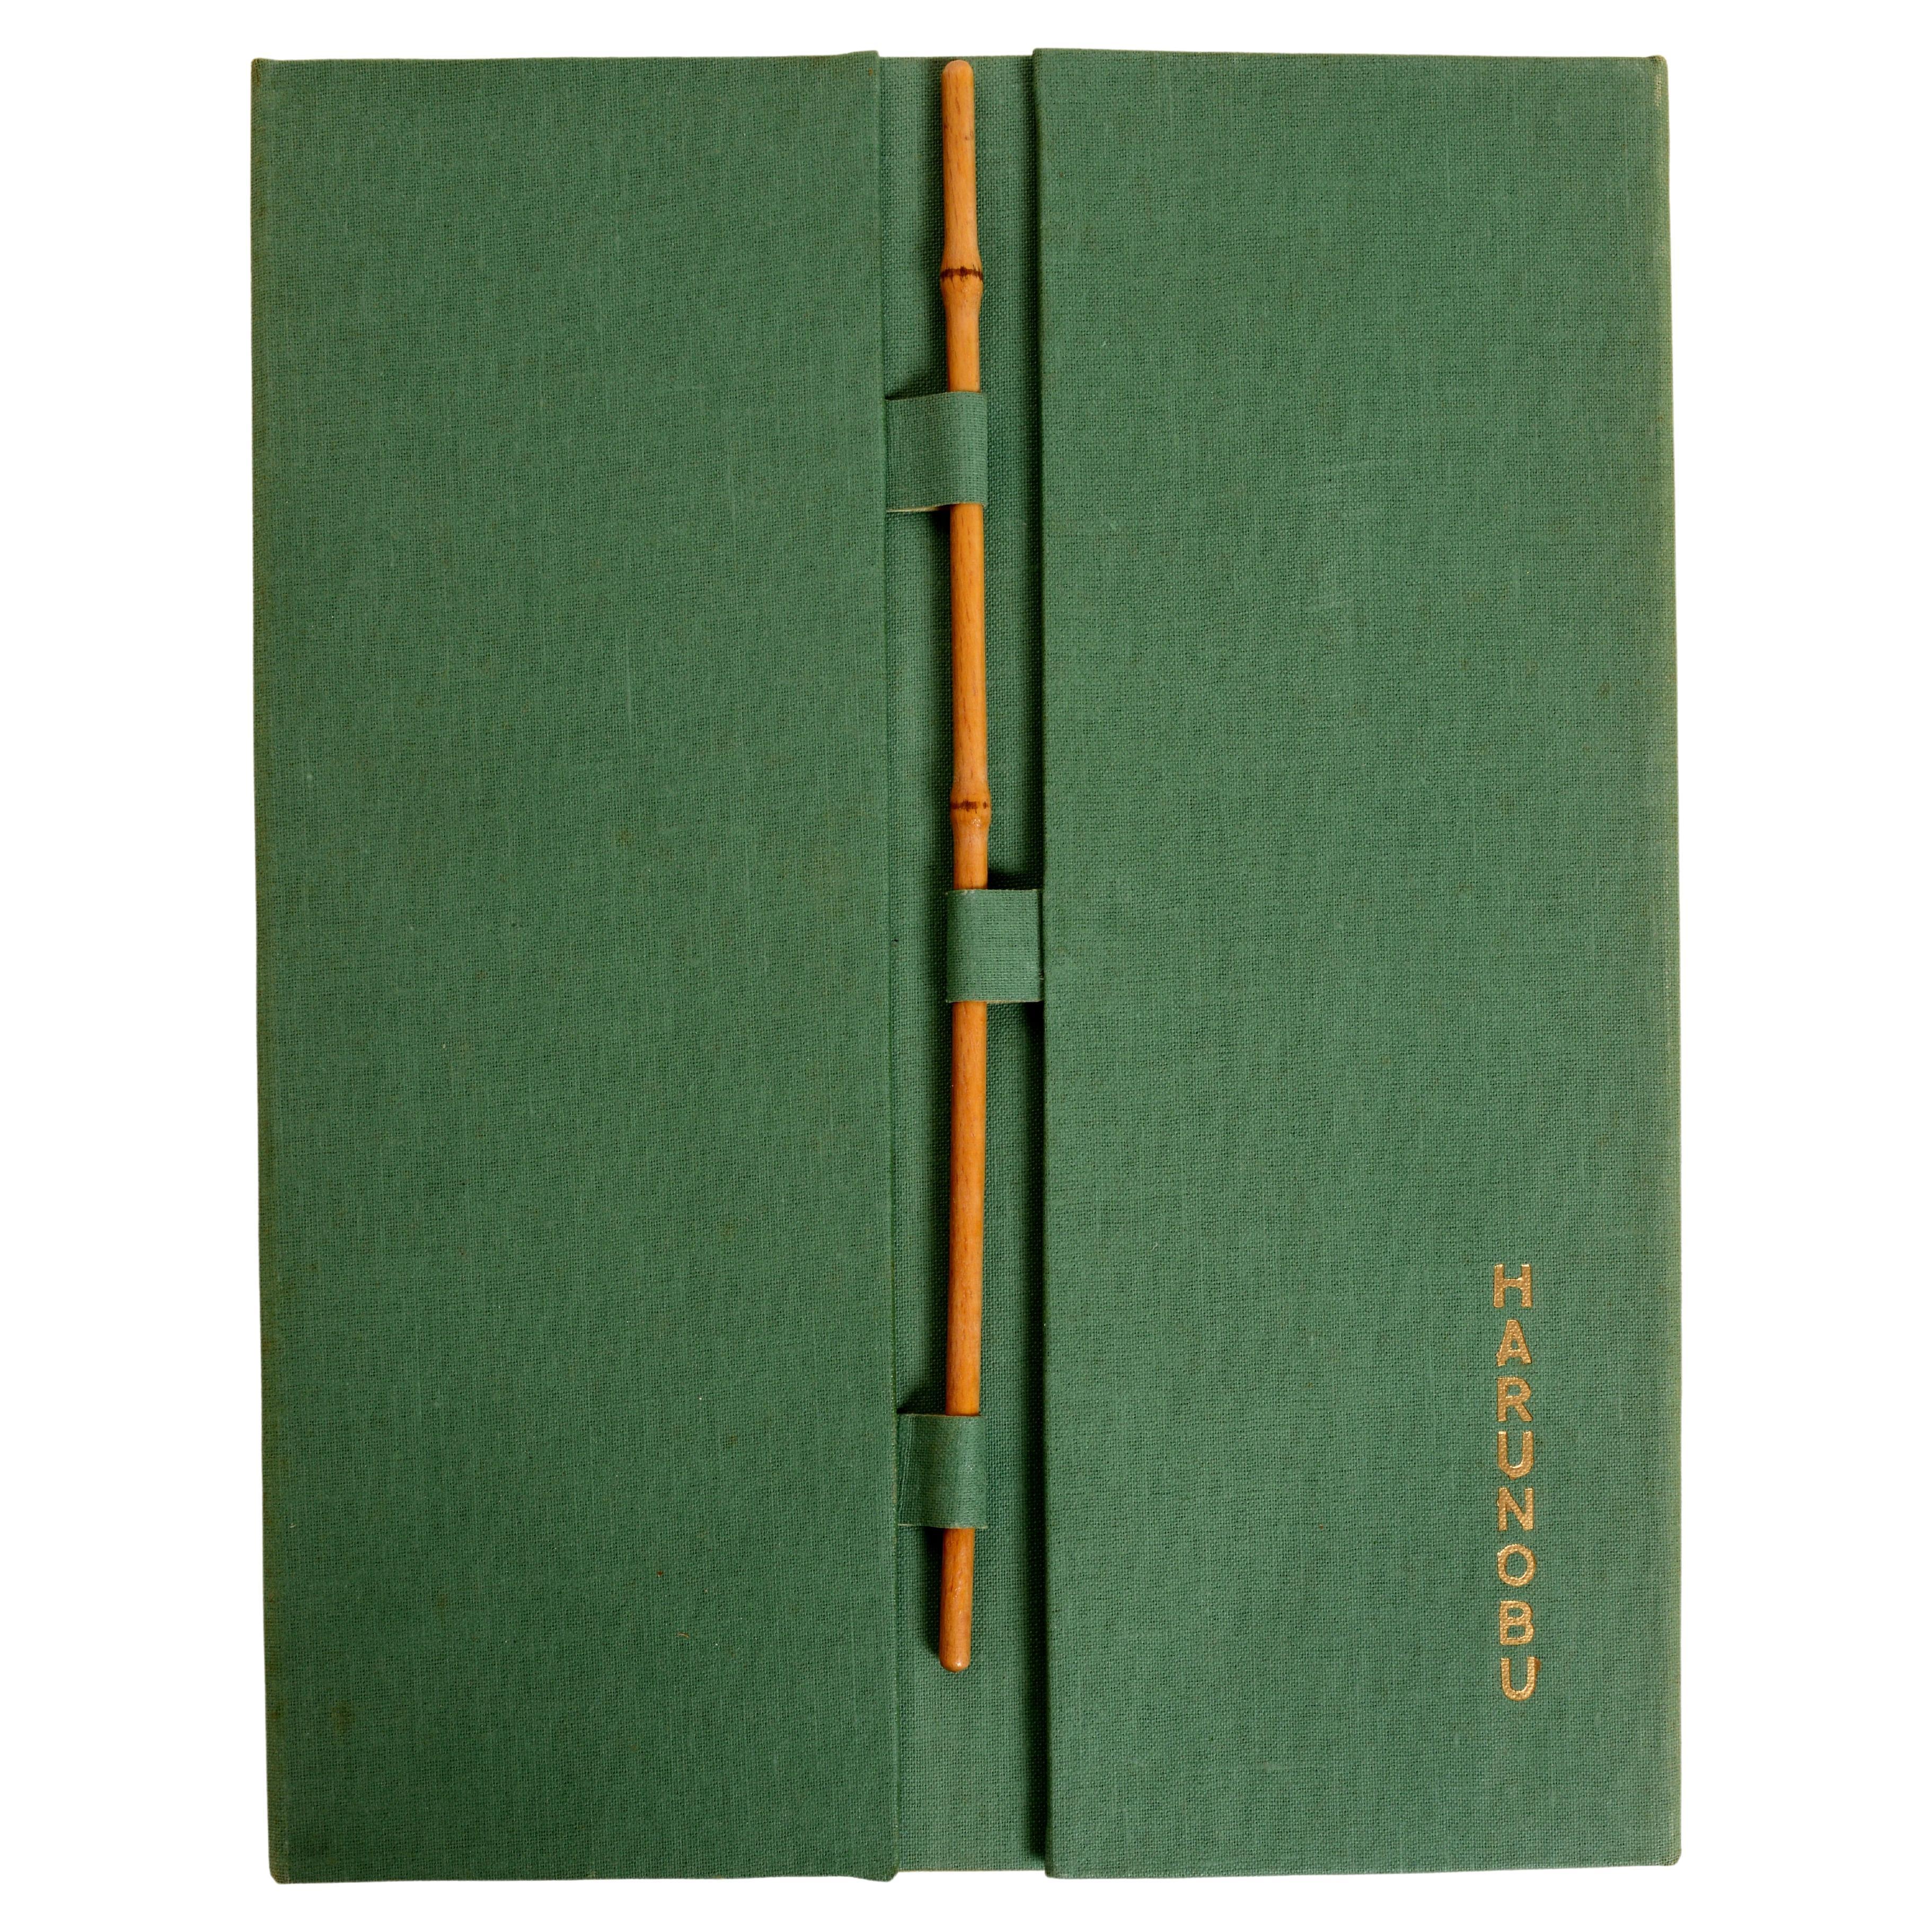 Harunobu, by Lubor Hajek, and translated by Hedda Vessela Stranska. 1st Edition: Spring Books, London, 1958. Softcover with Silk tied binding, pictorial softcover laid in to green cloth hardcover boards. Boards are secured by a bamboo rod. With 63